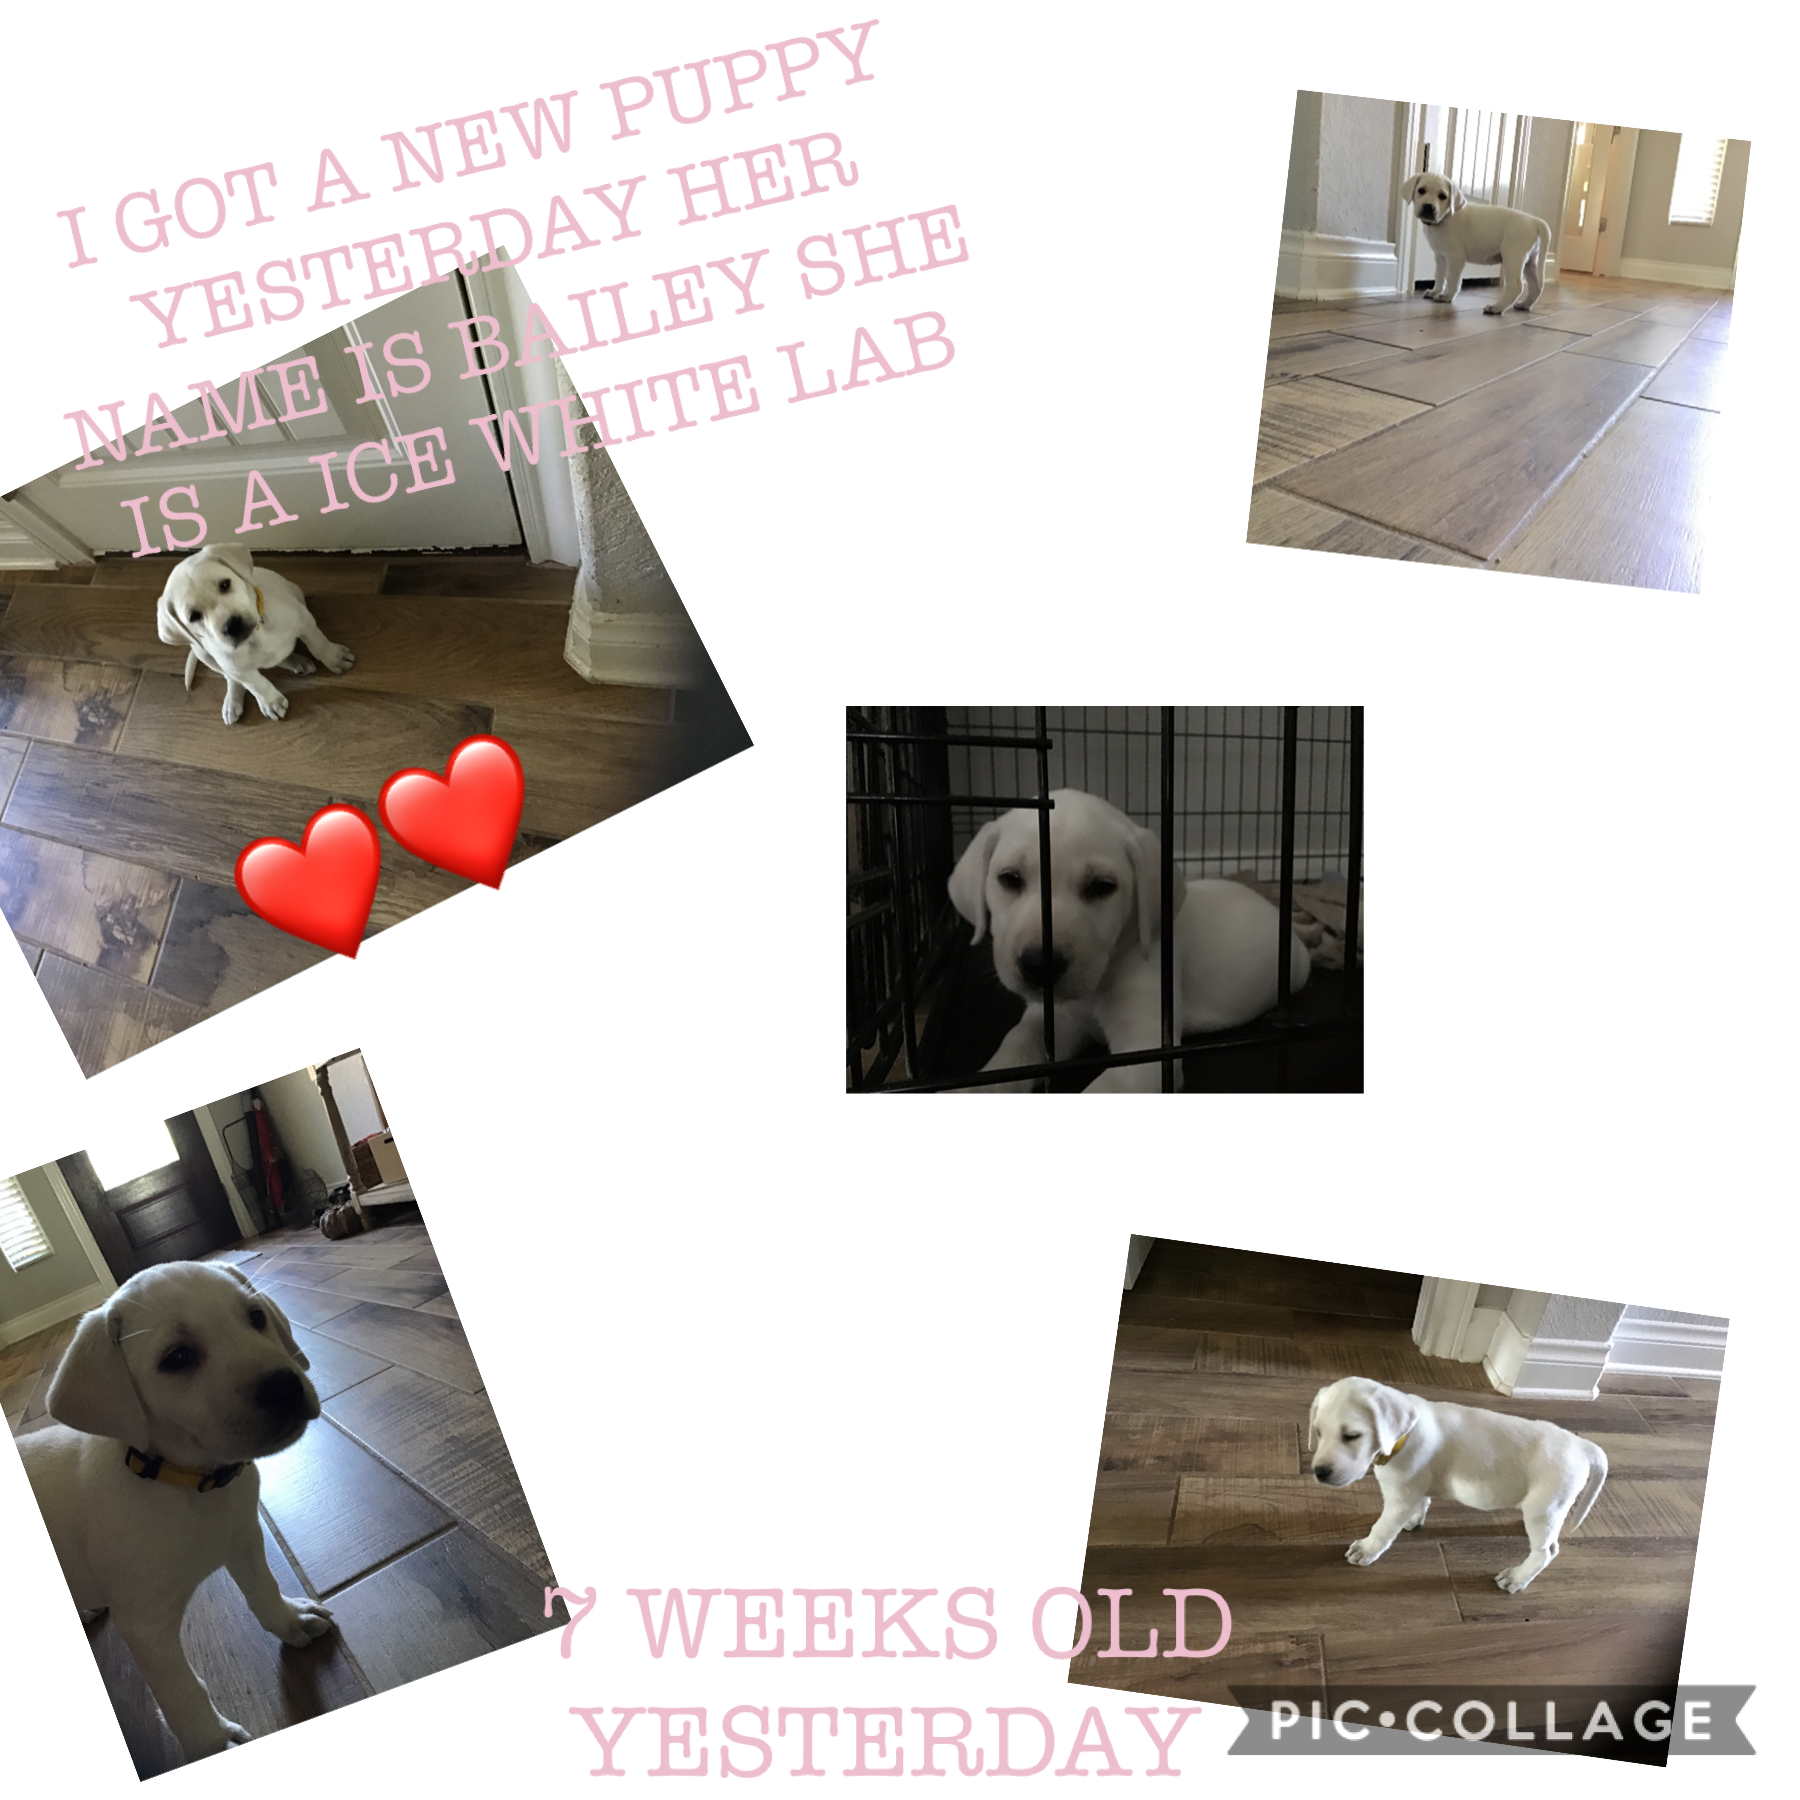 7 weeks yesterday Bailey❤️❤️
She is an Ice White Lab